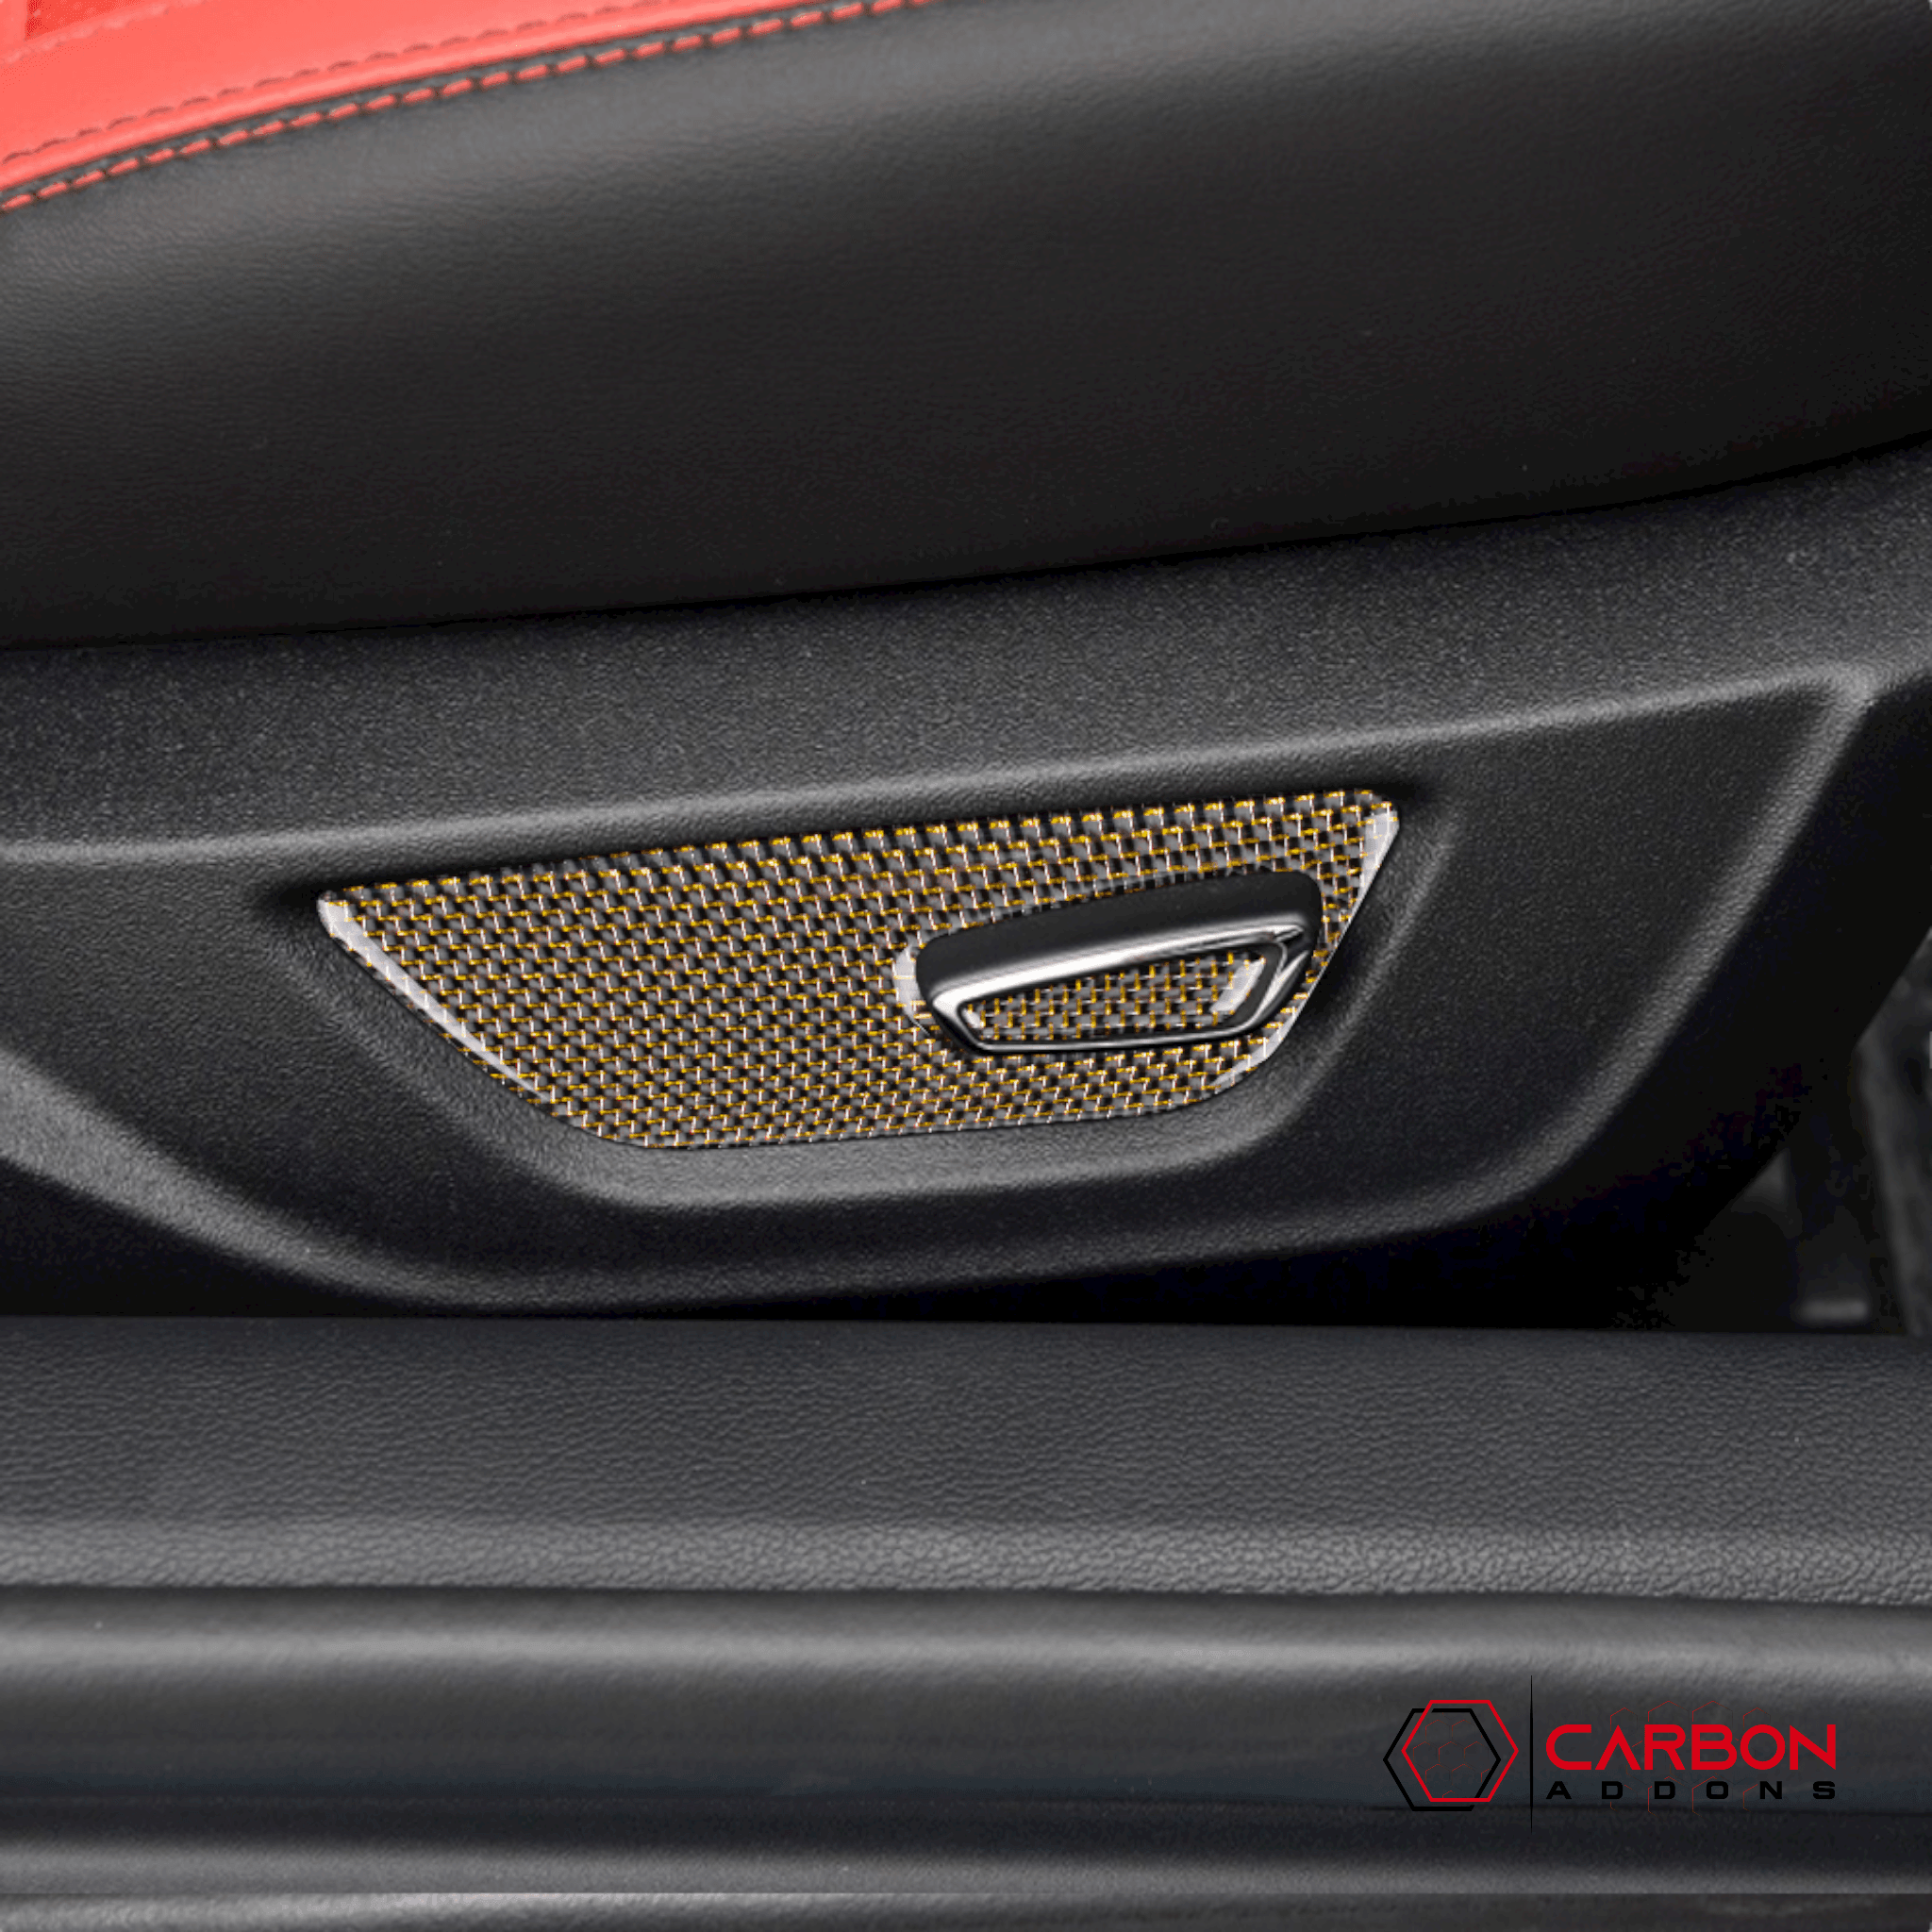 Reflective Carbon Fiber Seat Function Control Trim Overlay For Ford Mustang 2015-2023 - carbonaddons Carbon Fiber Parts, Accessories, Upgrades, Mods